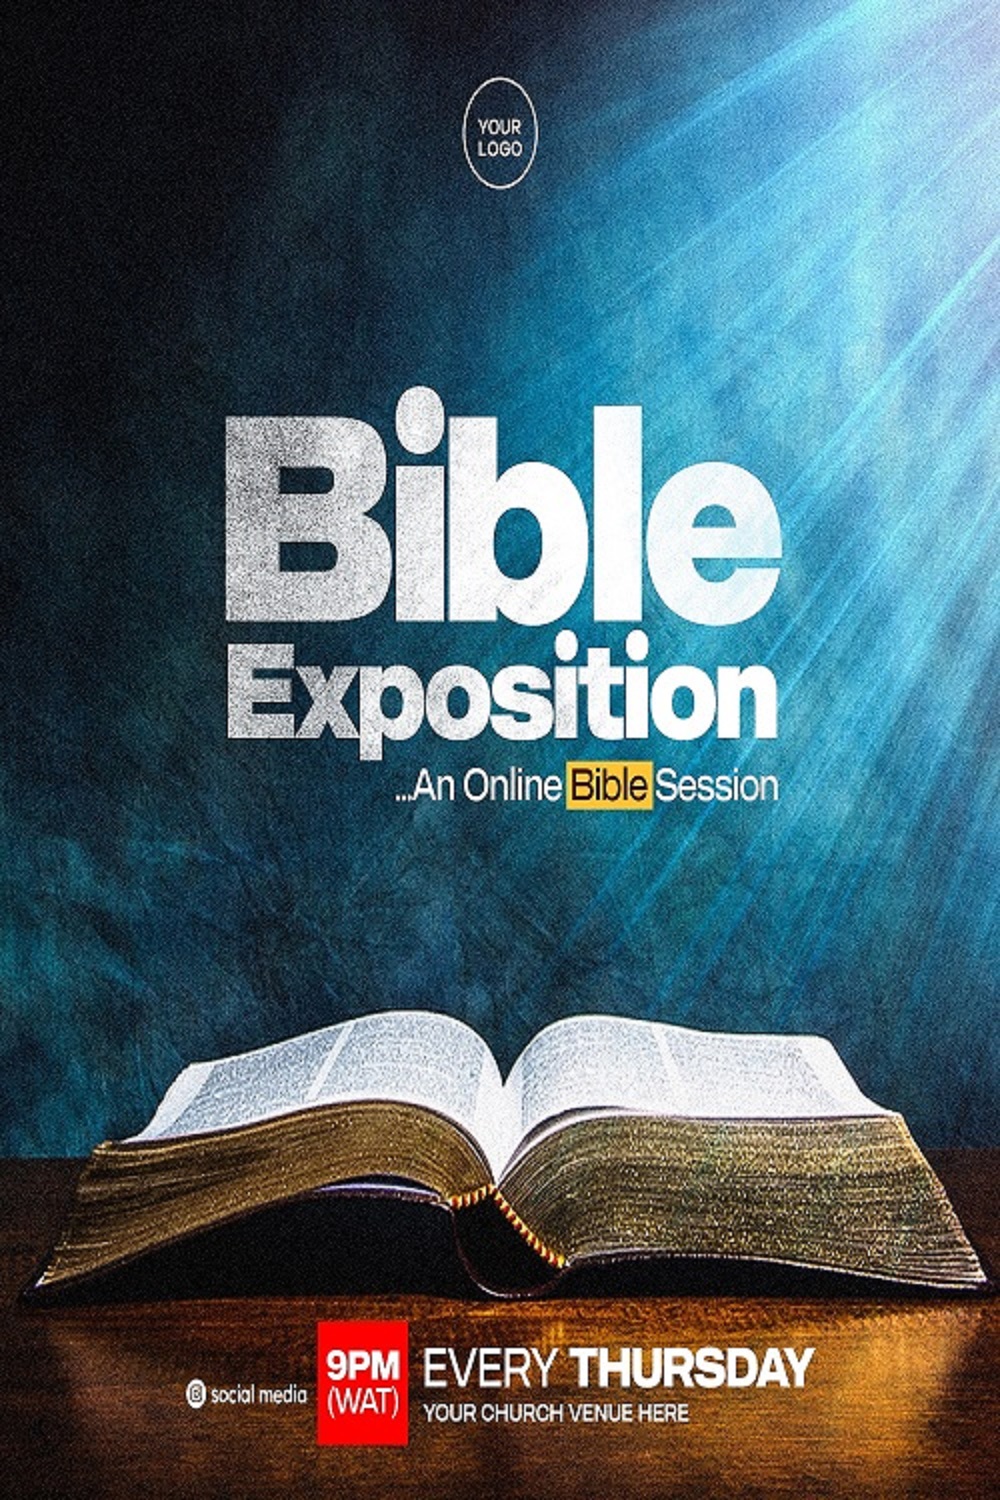 CHURCH BIBLE EXPOSITION FLYER pinterest preview image.